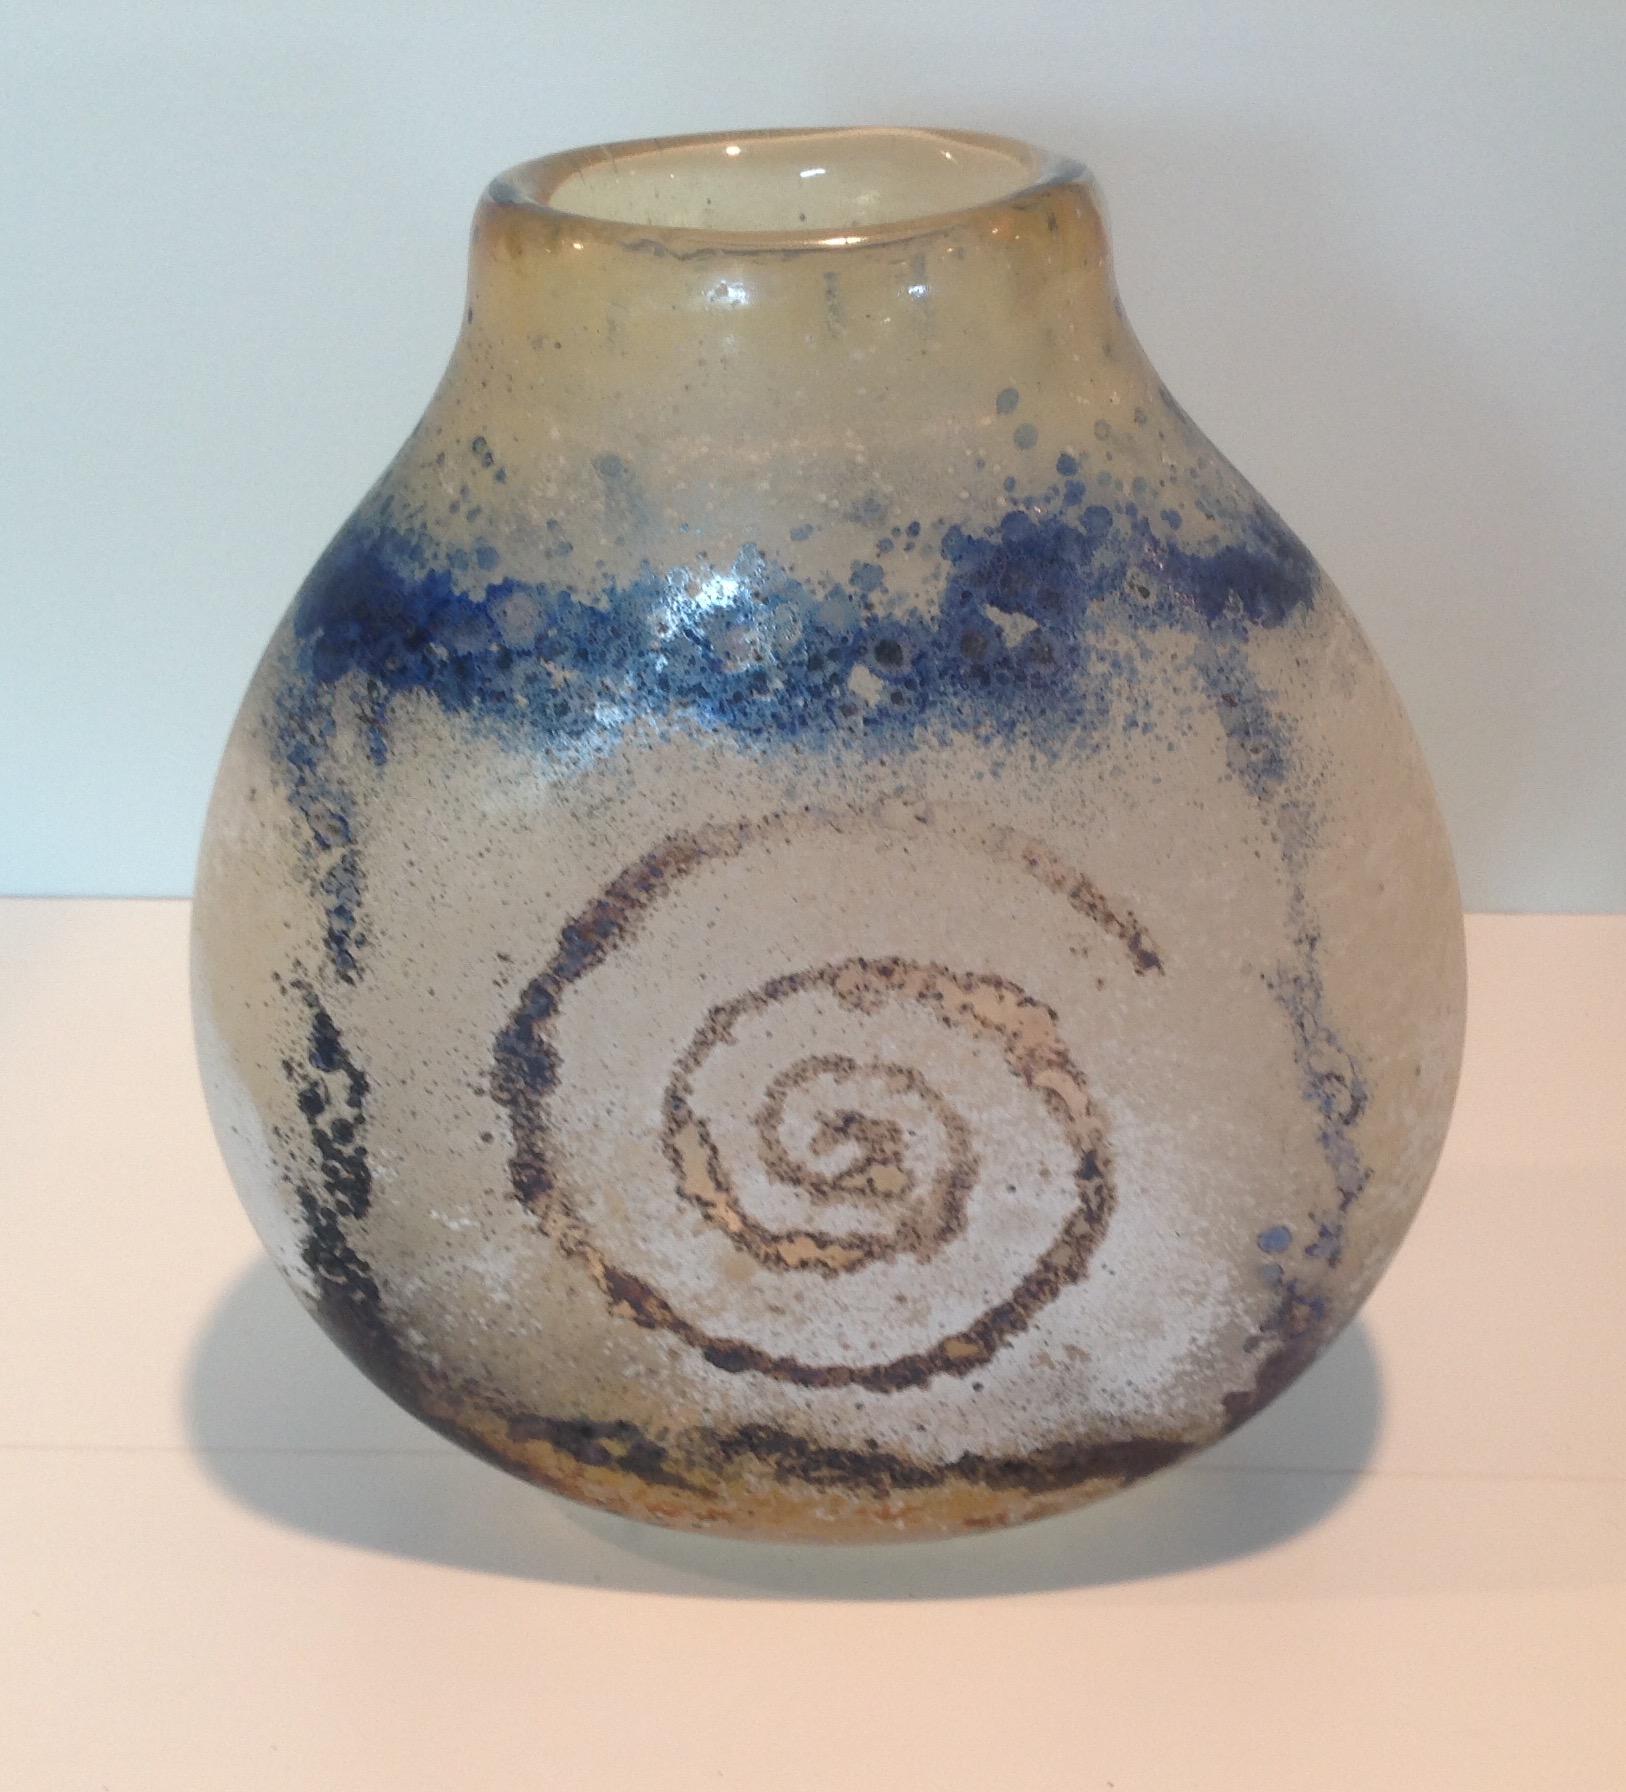 Amazing spiral decorated scavo vase by Seguso Viro. Amazing decoration and workmanship. Have not seen another comparable on the market.

Seguso Viro creates on the island of Murano in Venice, Italy where Venetian glass has been made for centuries